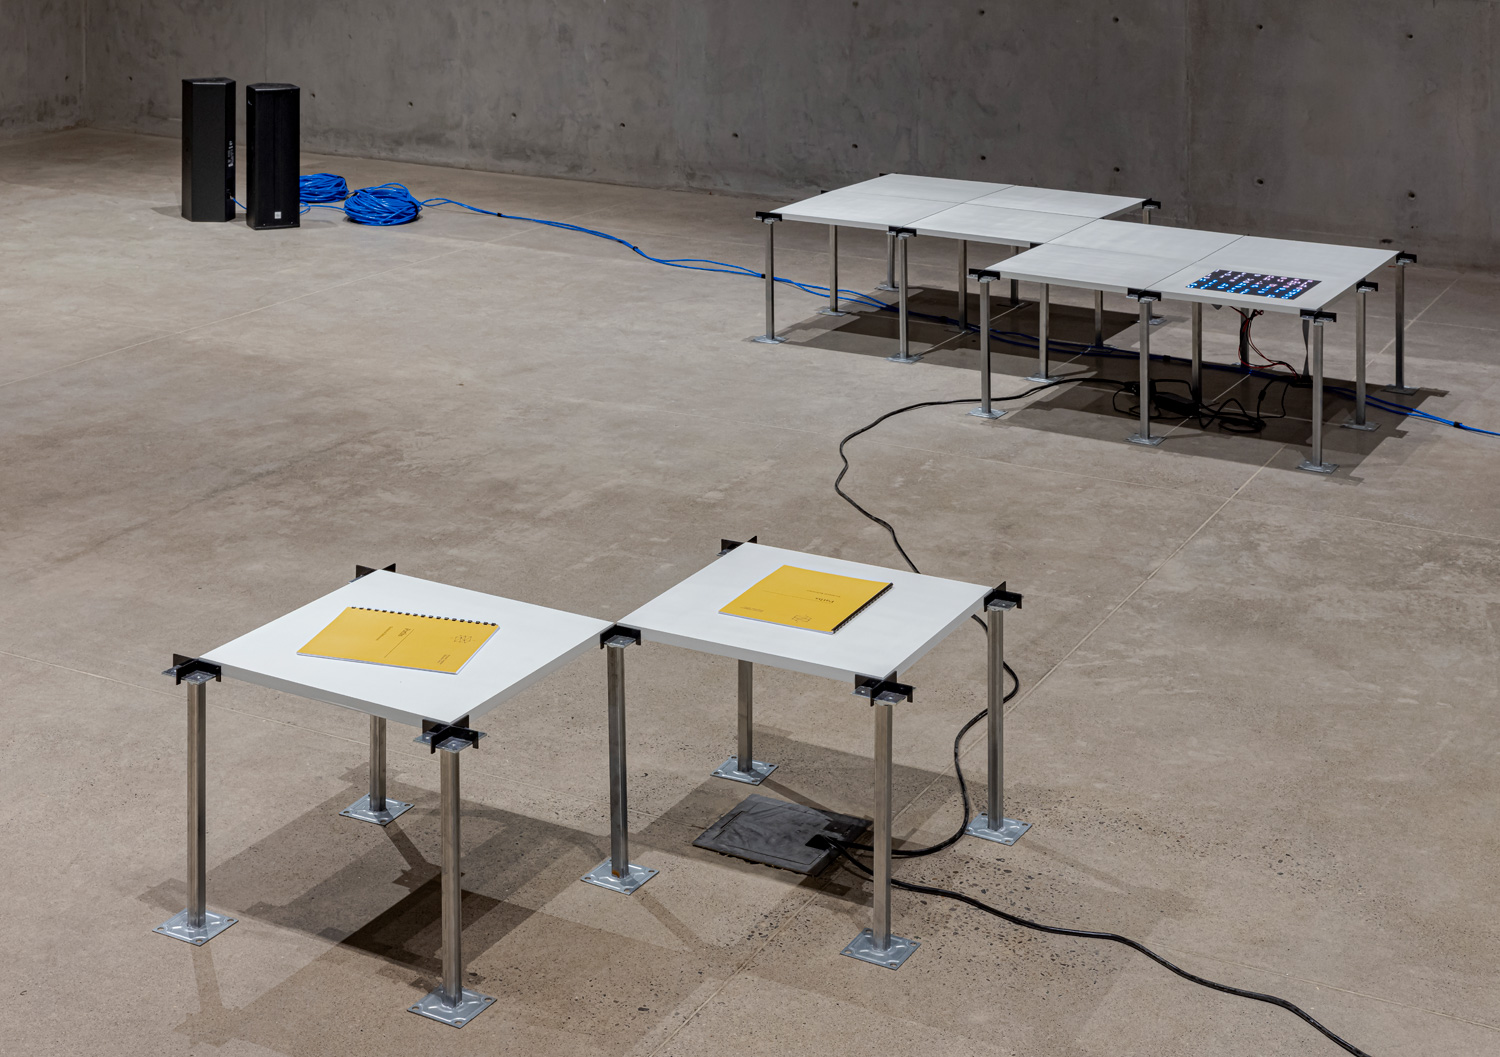 A closeup of one of the modular platforms. Sitting on it are two copies of 'Paths', the exhibition book. It has a yellow cover and black comb binding. In the background is another platform with an embedded LED matrix display. Next to that are two tall speakers sitting on the ground, with two large spools of blue ethernet cable.